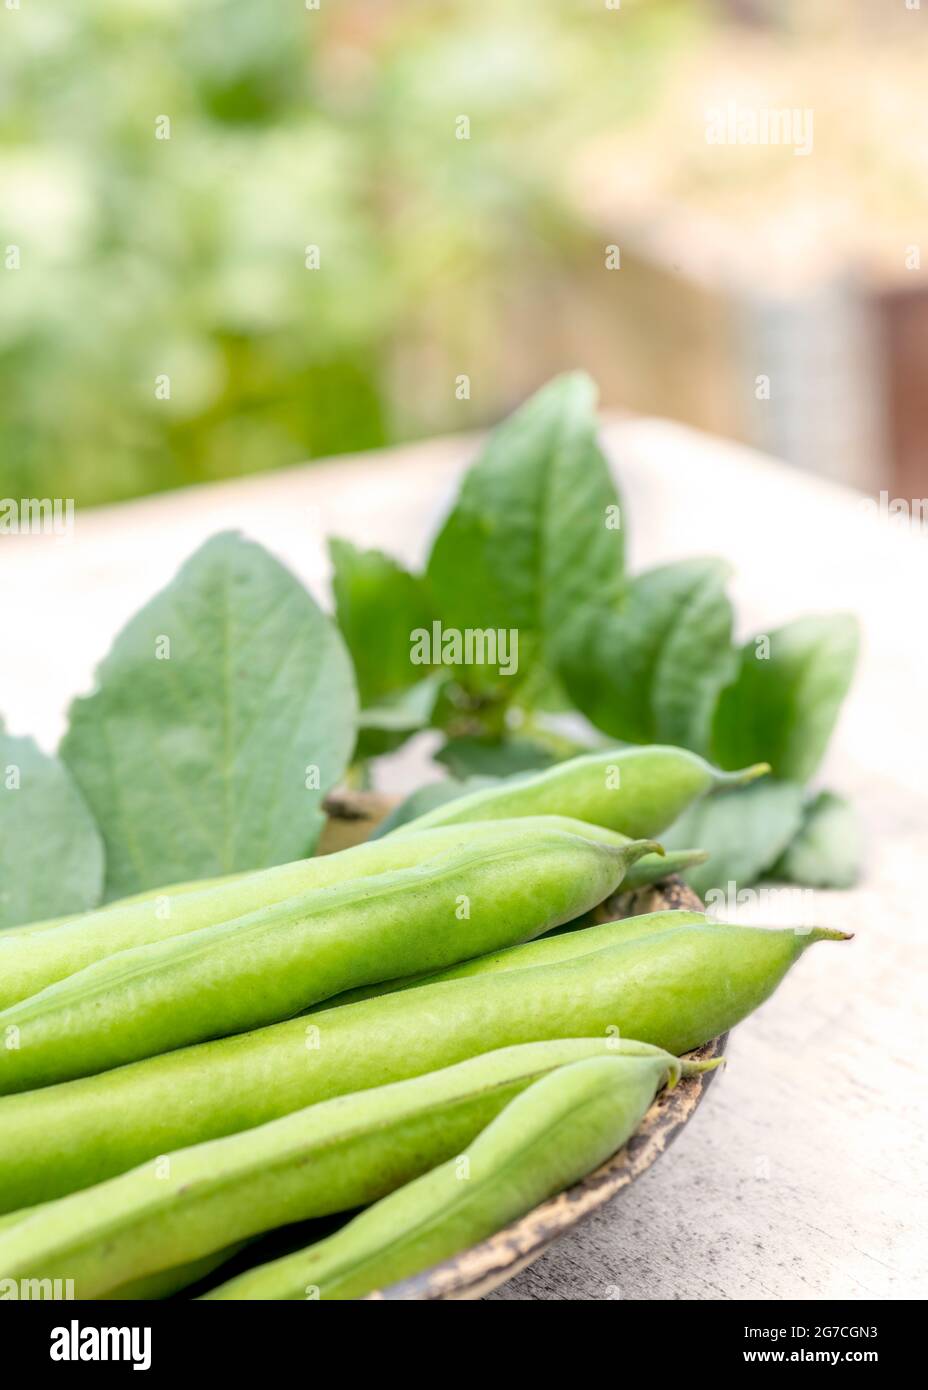 broad beans vicia faba freshly picked home grown on an allotment ,garden or small holding blurred background selective focus copy space above Stock Photo